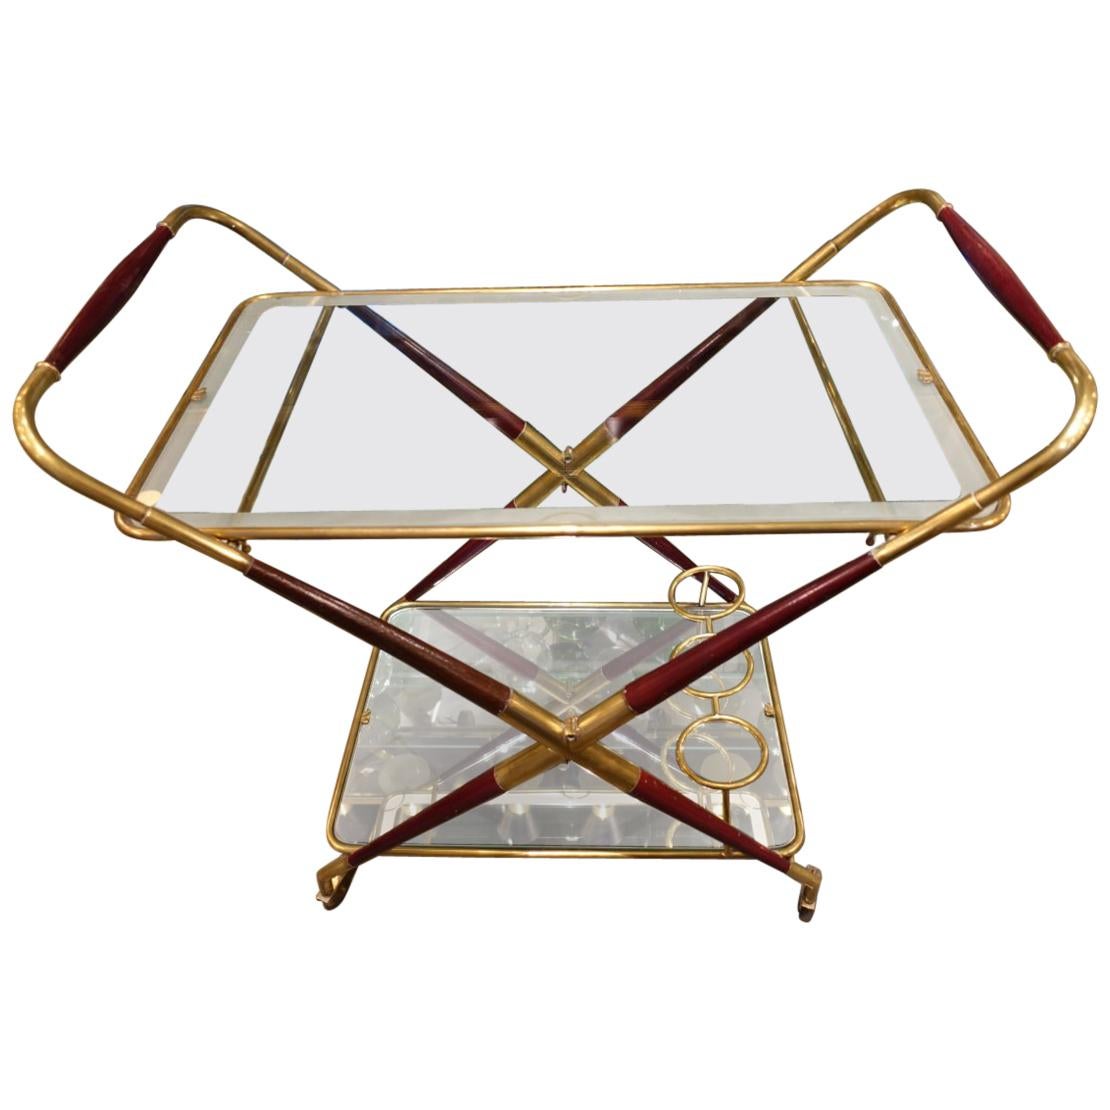 Sophisticated Folding French Drinks Trolley-Brass, Wood and Mirror